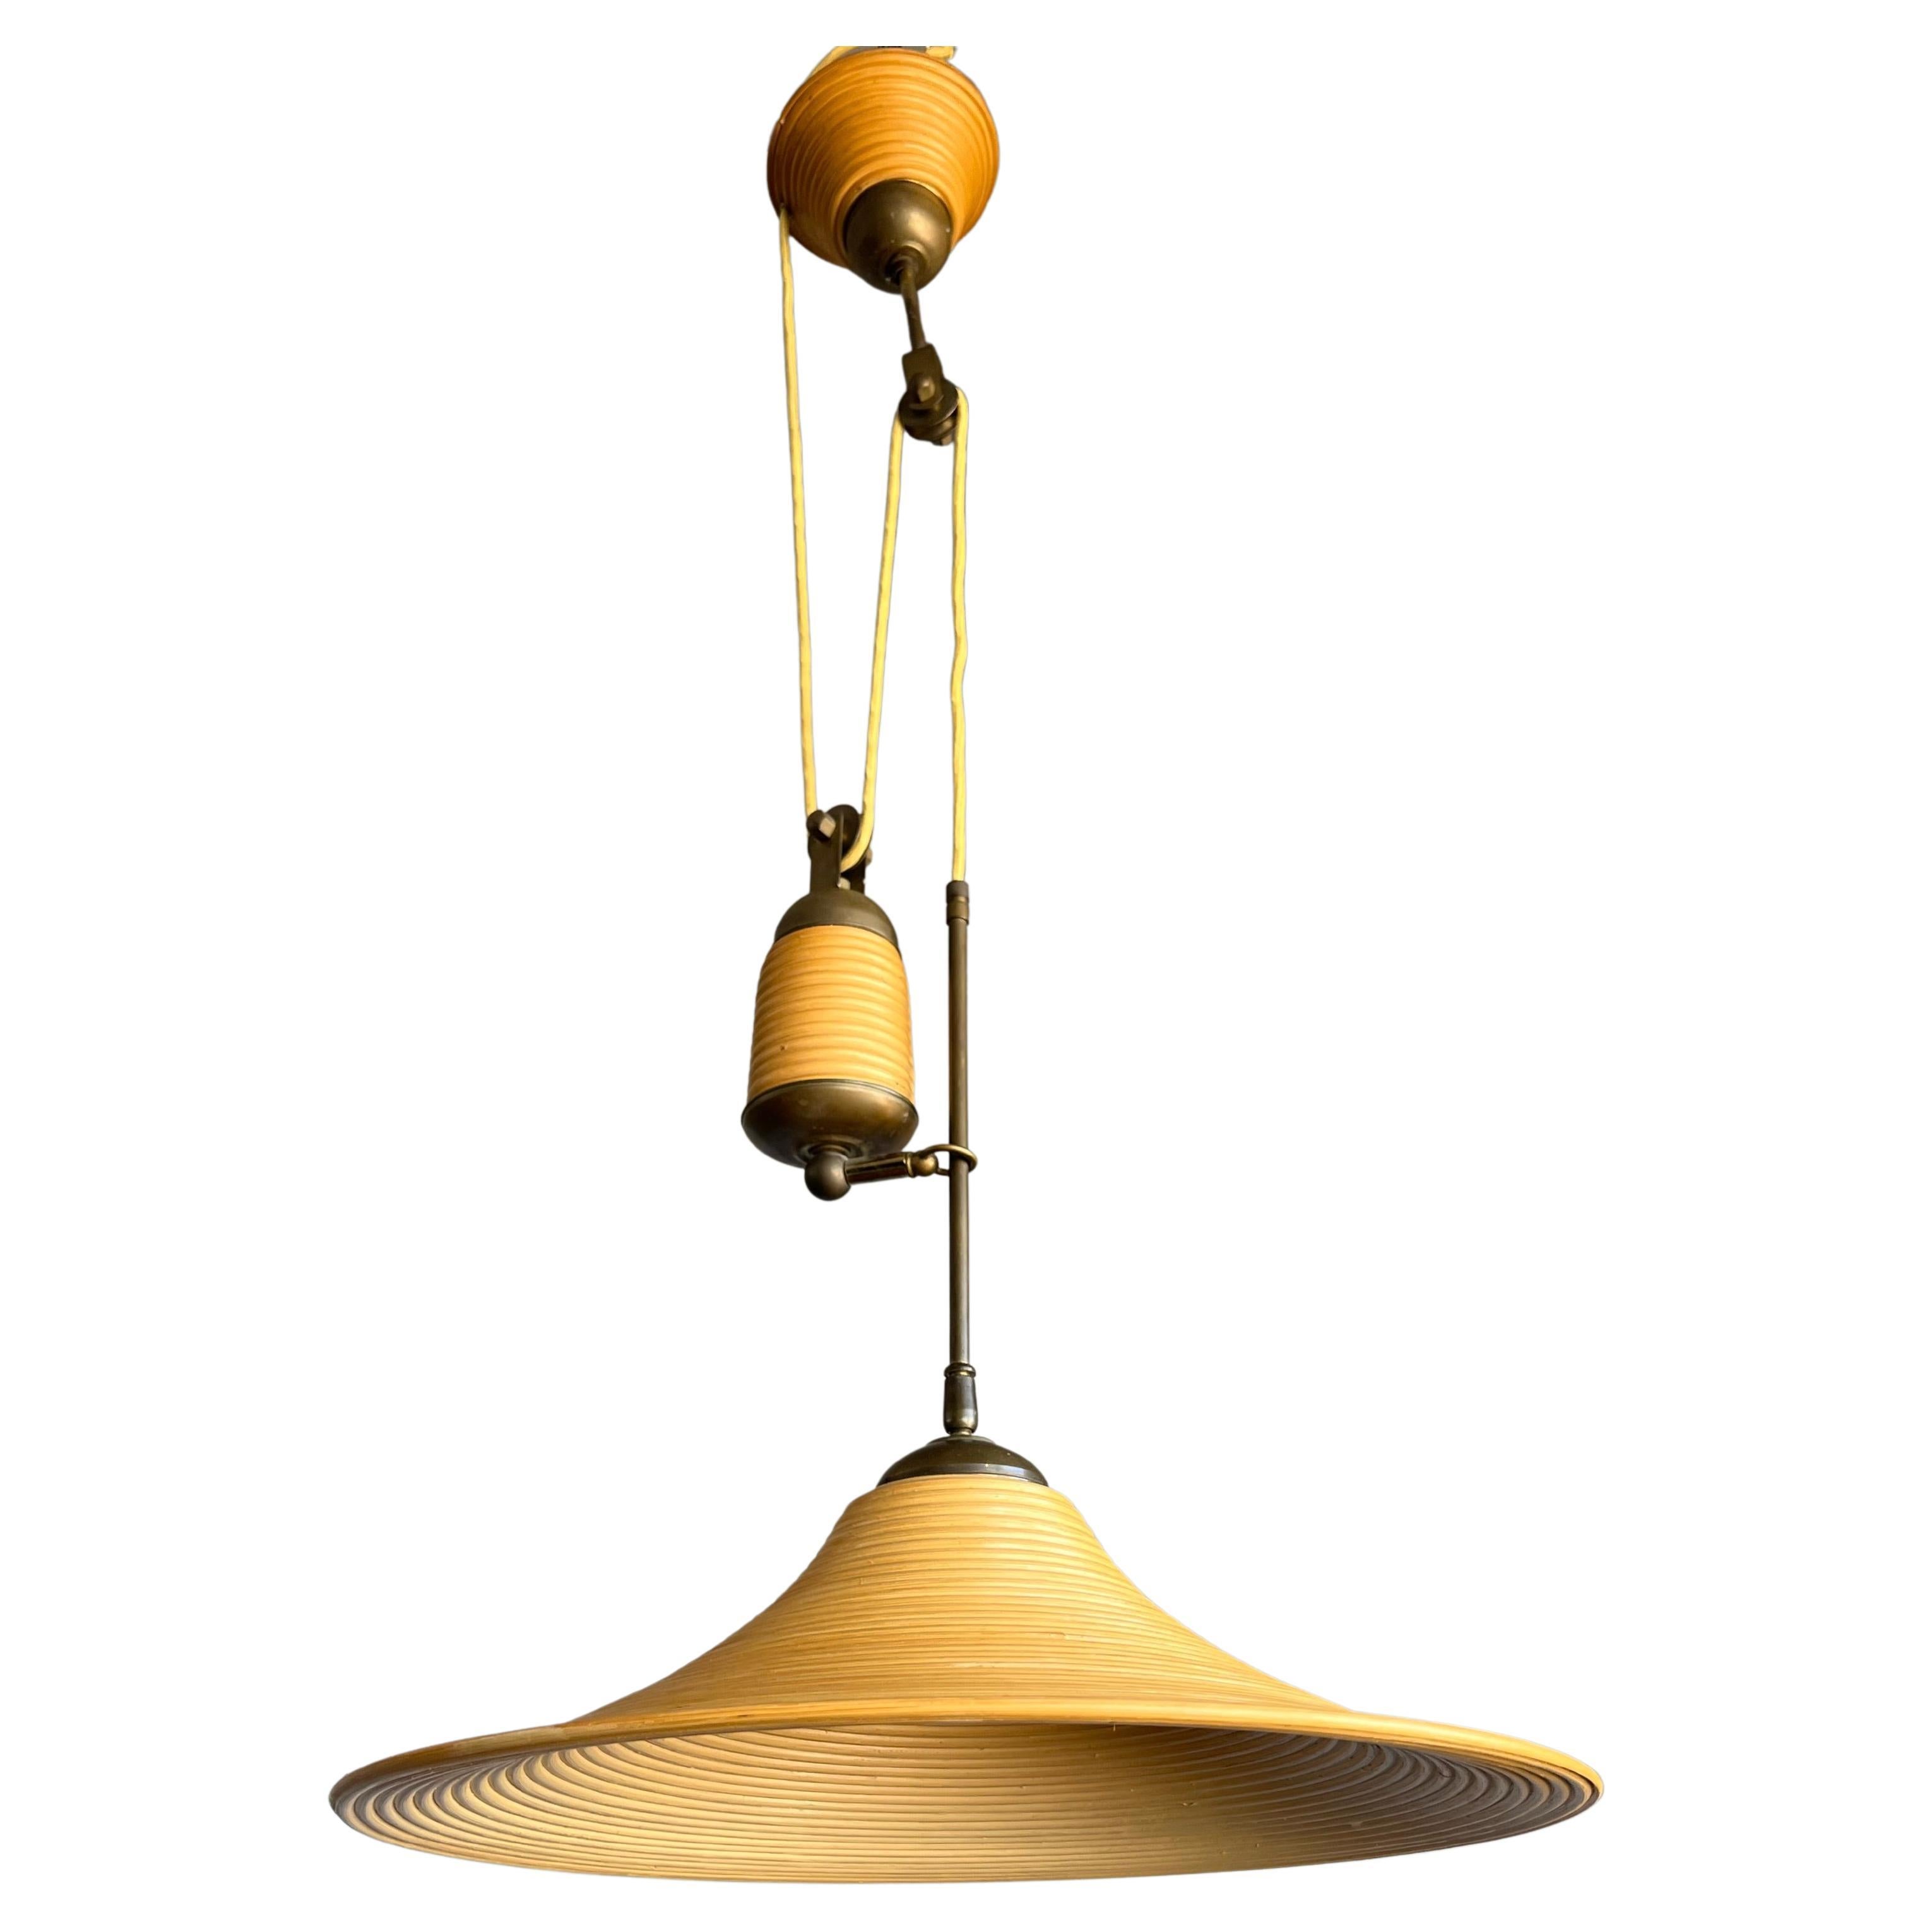 Rare Handcrafted Mid-Century Modern Rattan & Brass Pendant Light / Ceiling Lamp For Sale